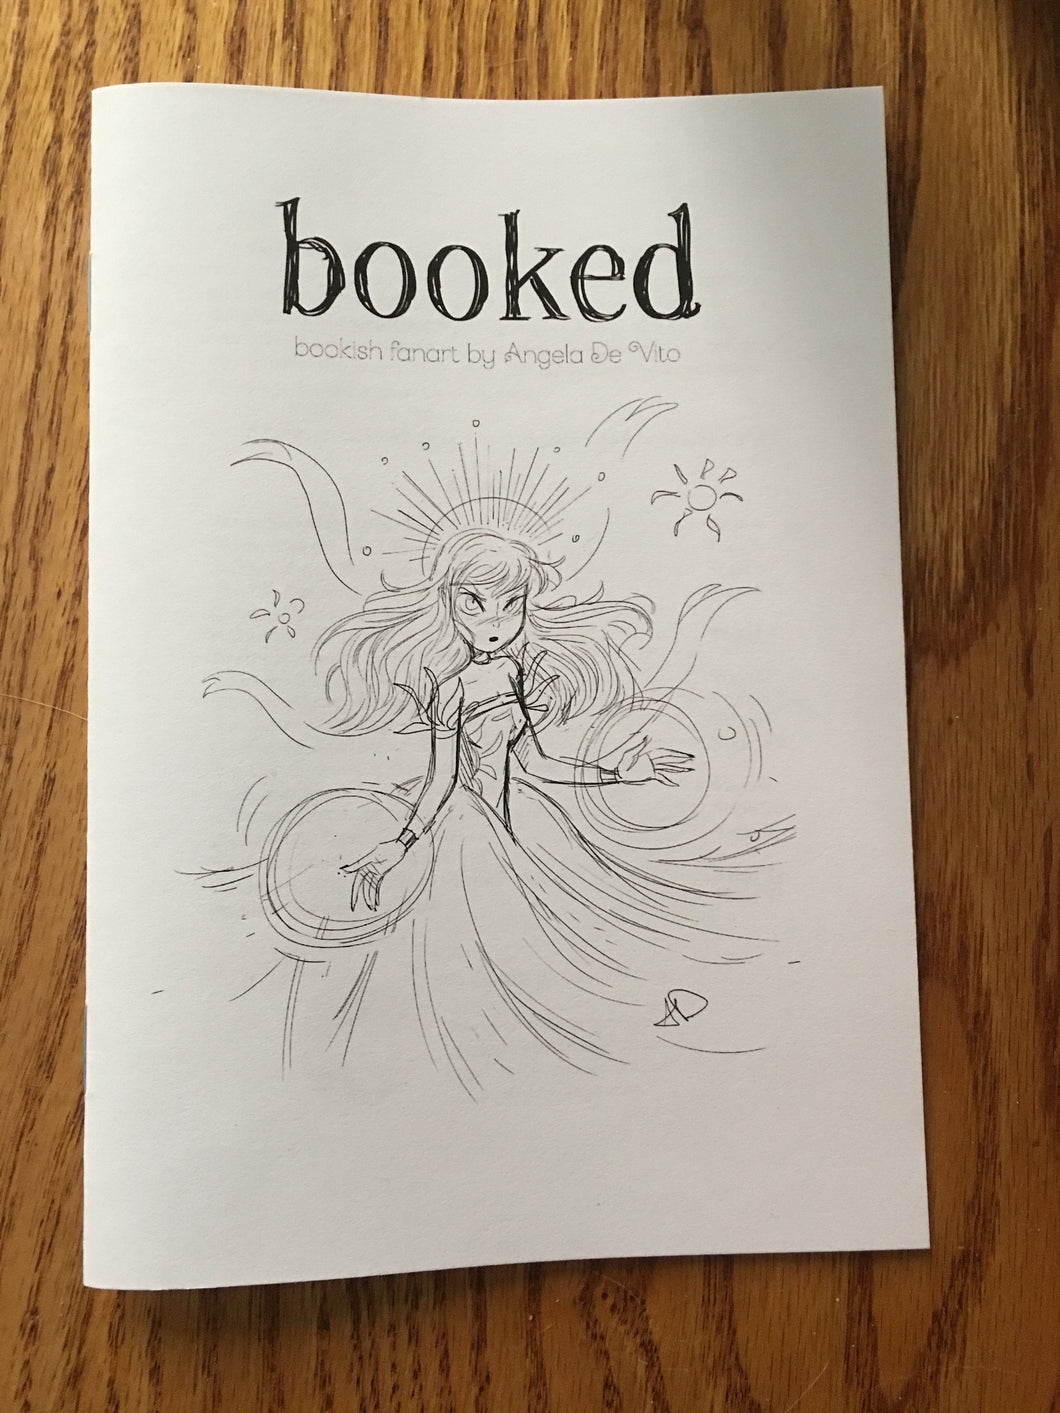 Booked - Bookish Sketchbook, Bookish, Illustration